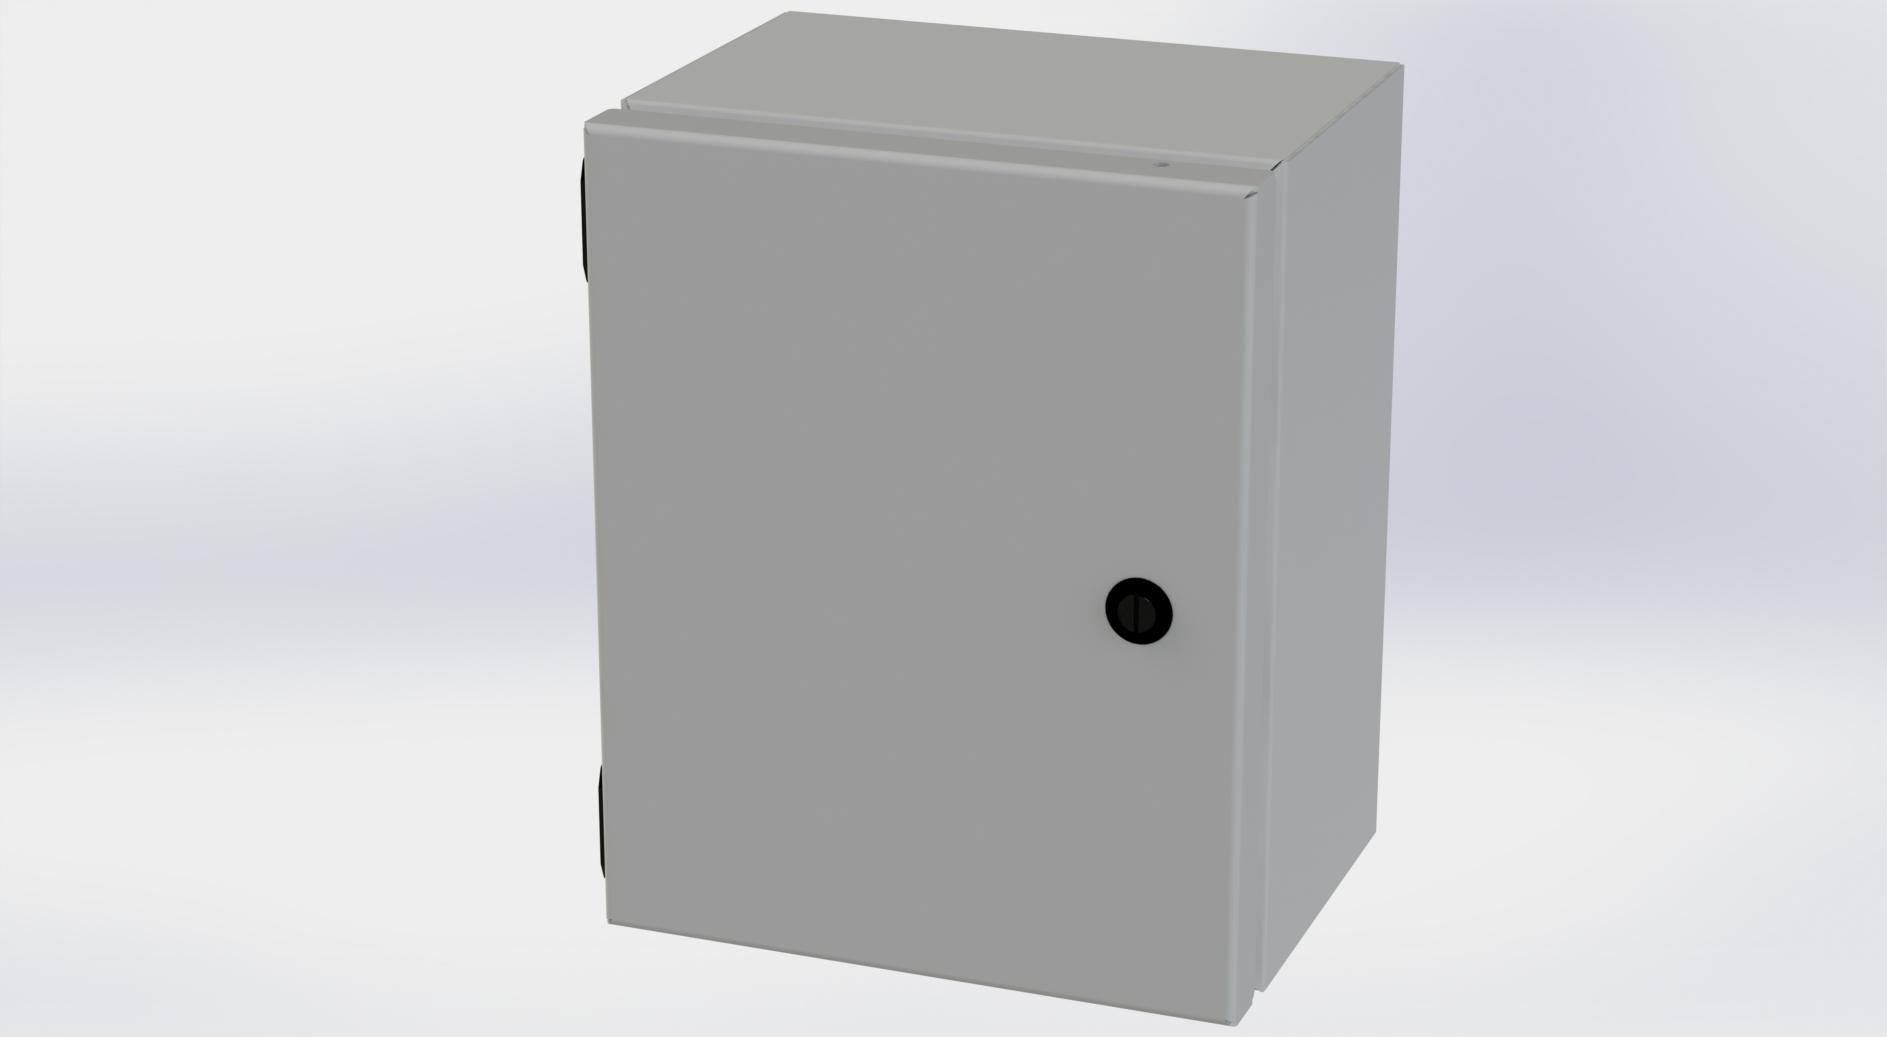 Saginaw Control SCE-10086ELJ ELJ Enclosure, Height:10.00", Width:8.00", Depth:6.00", ANSI-61 gray powder coating inside and out. Optional sub-panels are powder coated white.